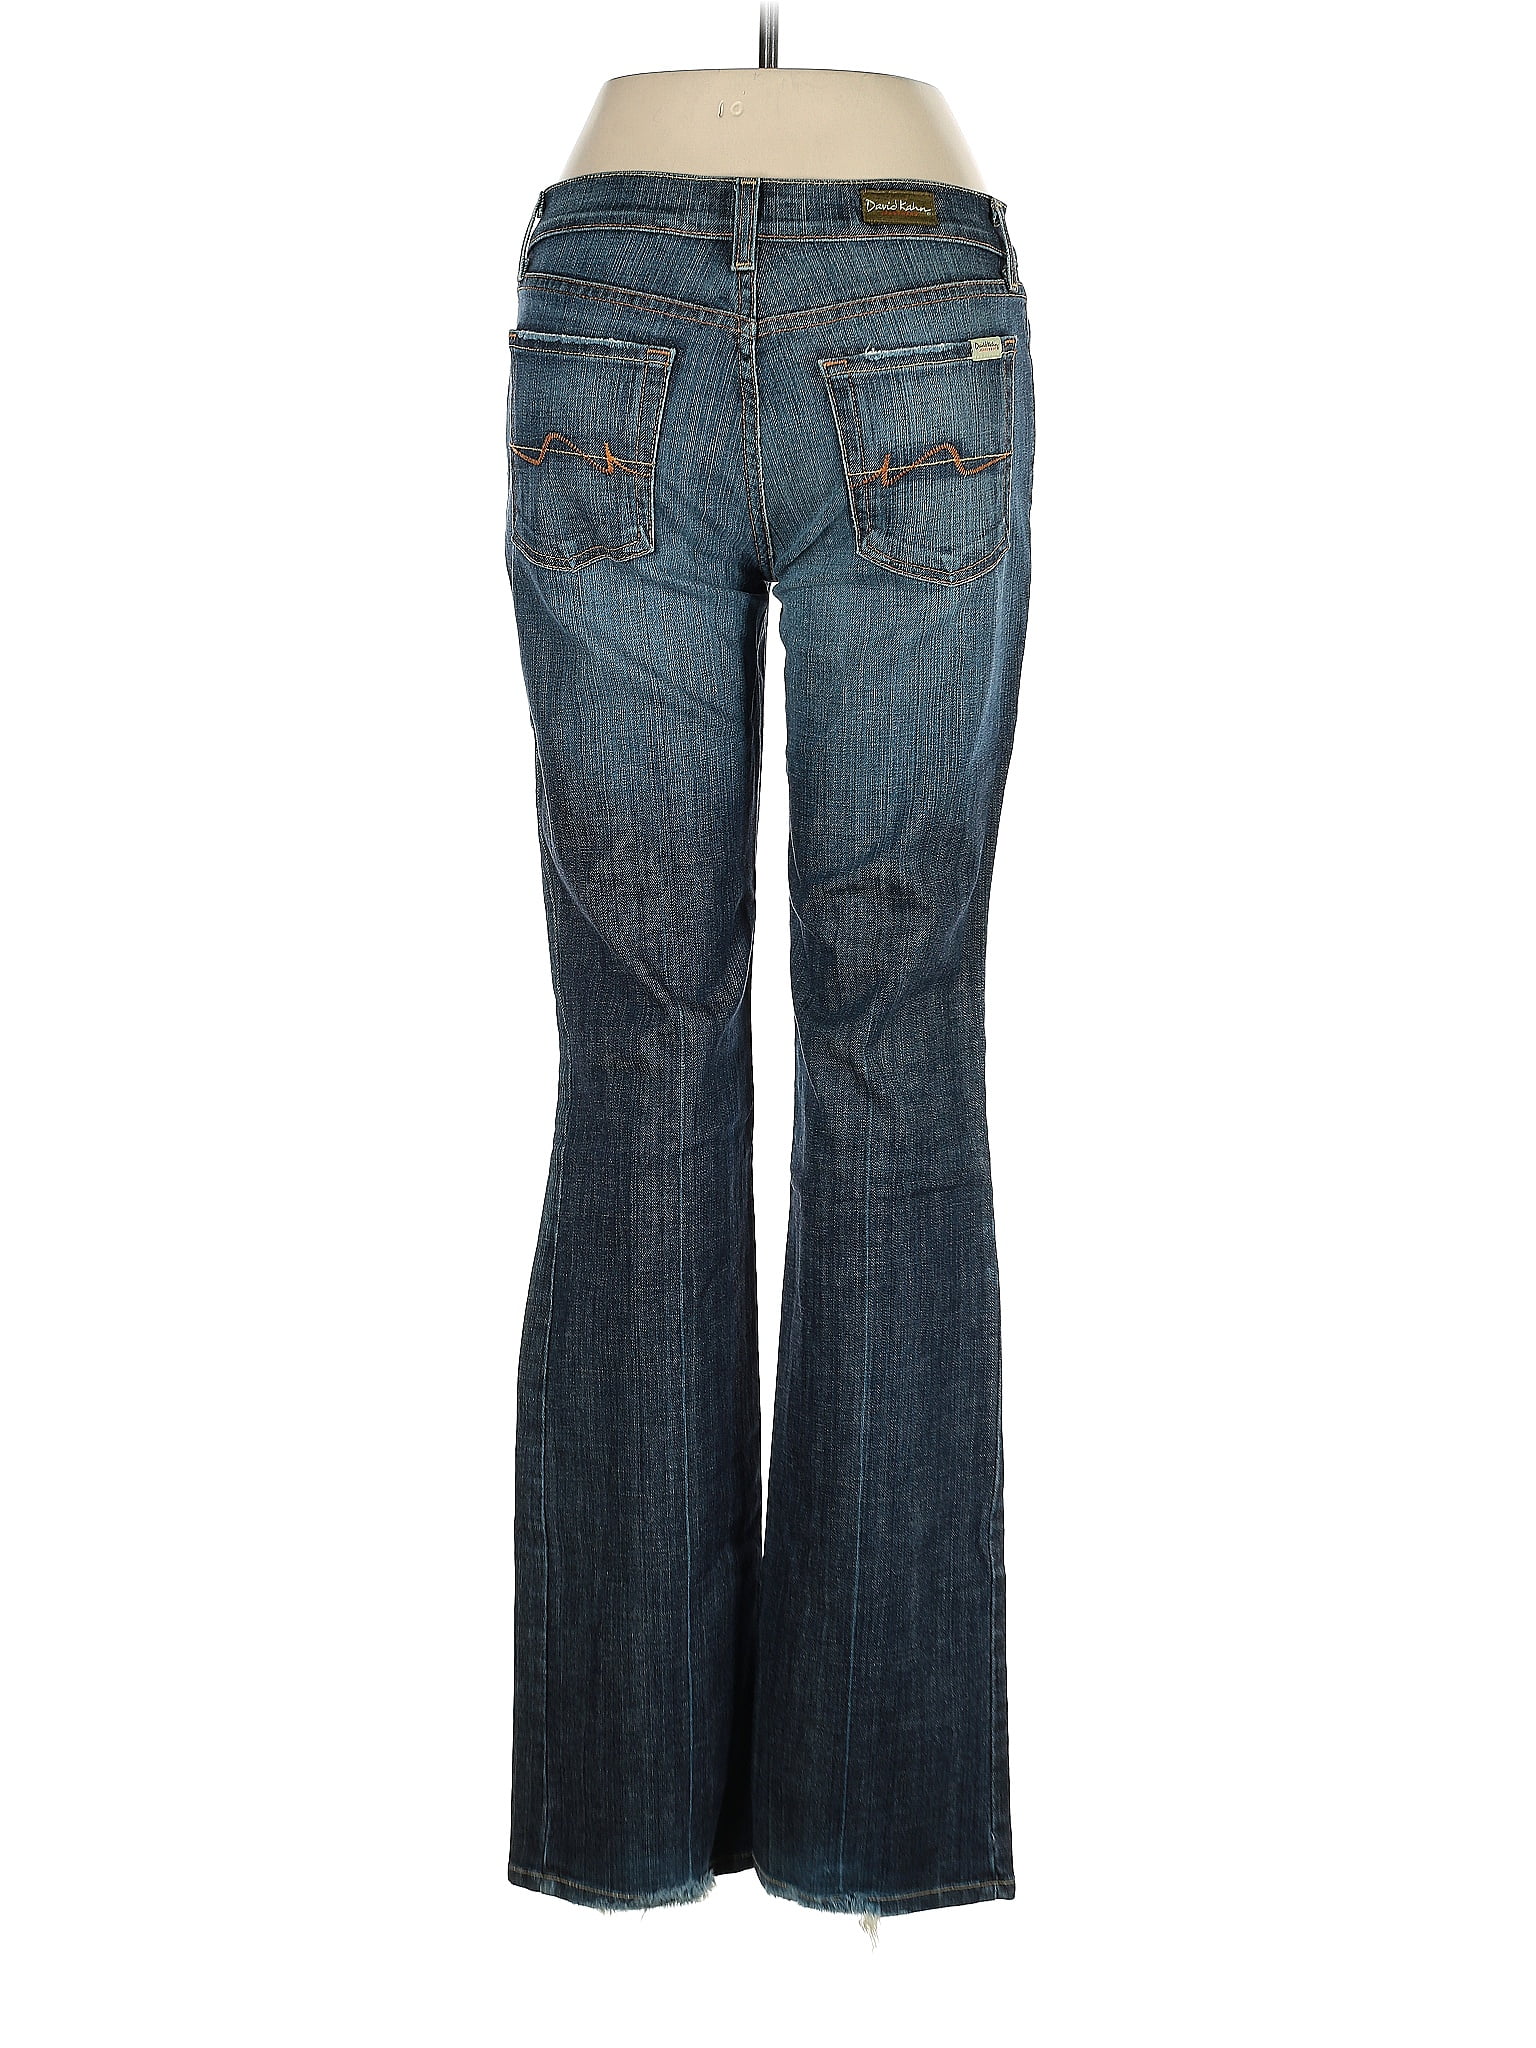 Simply Vera Vera Wang Women's Bootcut Jeans On Sale Up To 90% Off Retail